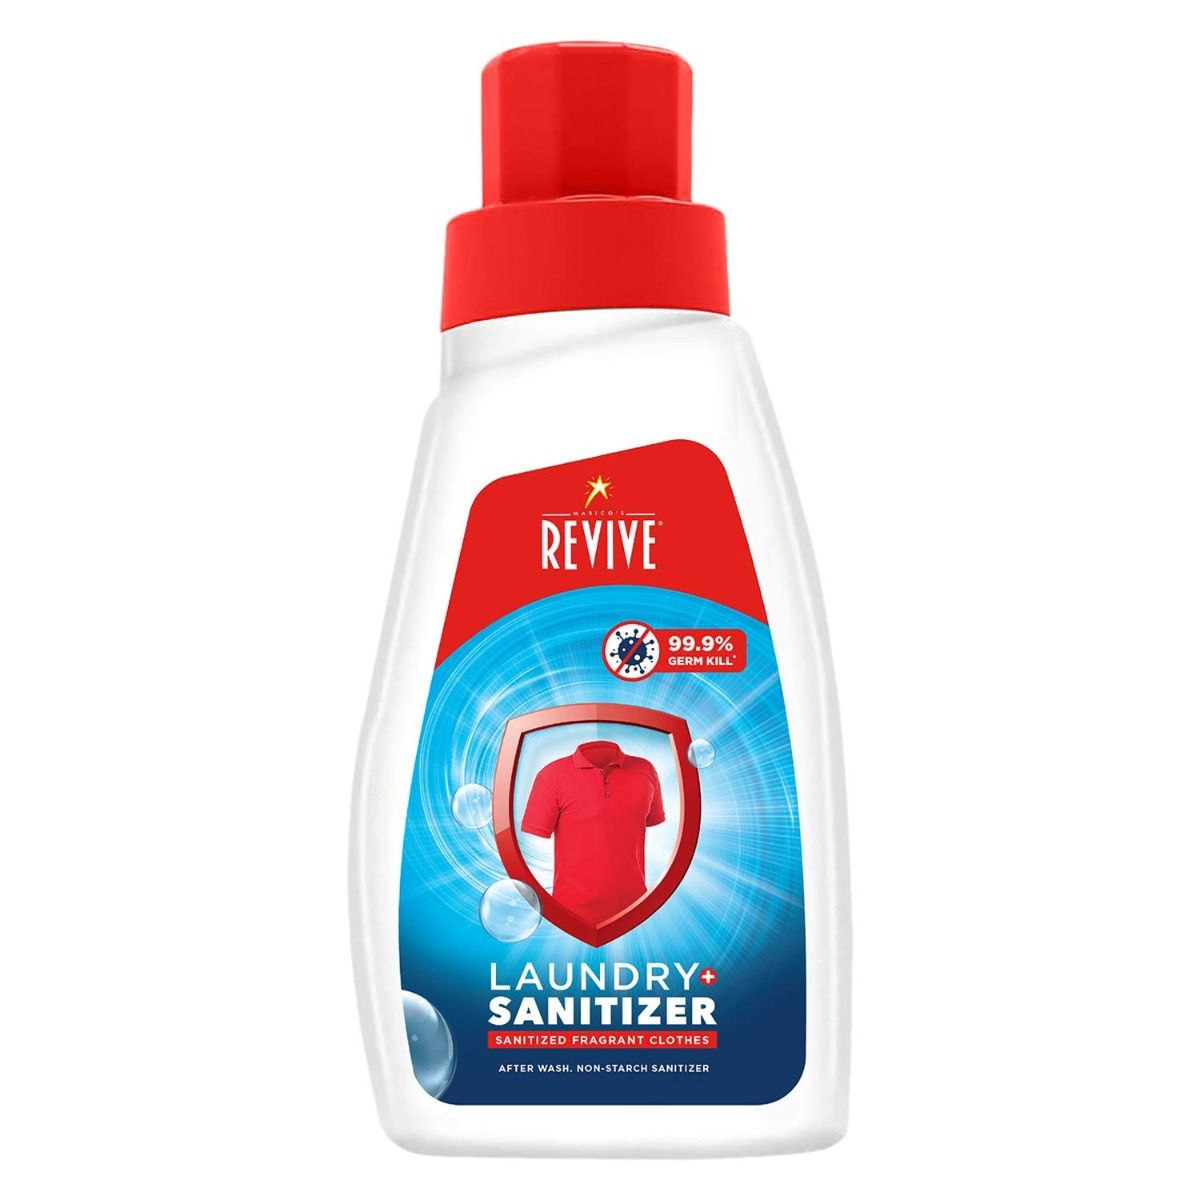 Revive Laundry Sanitizer, 500ml, Pack of 1 